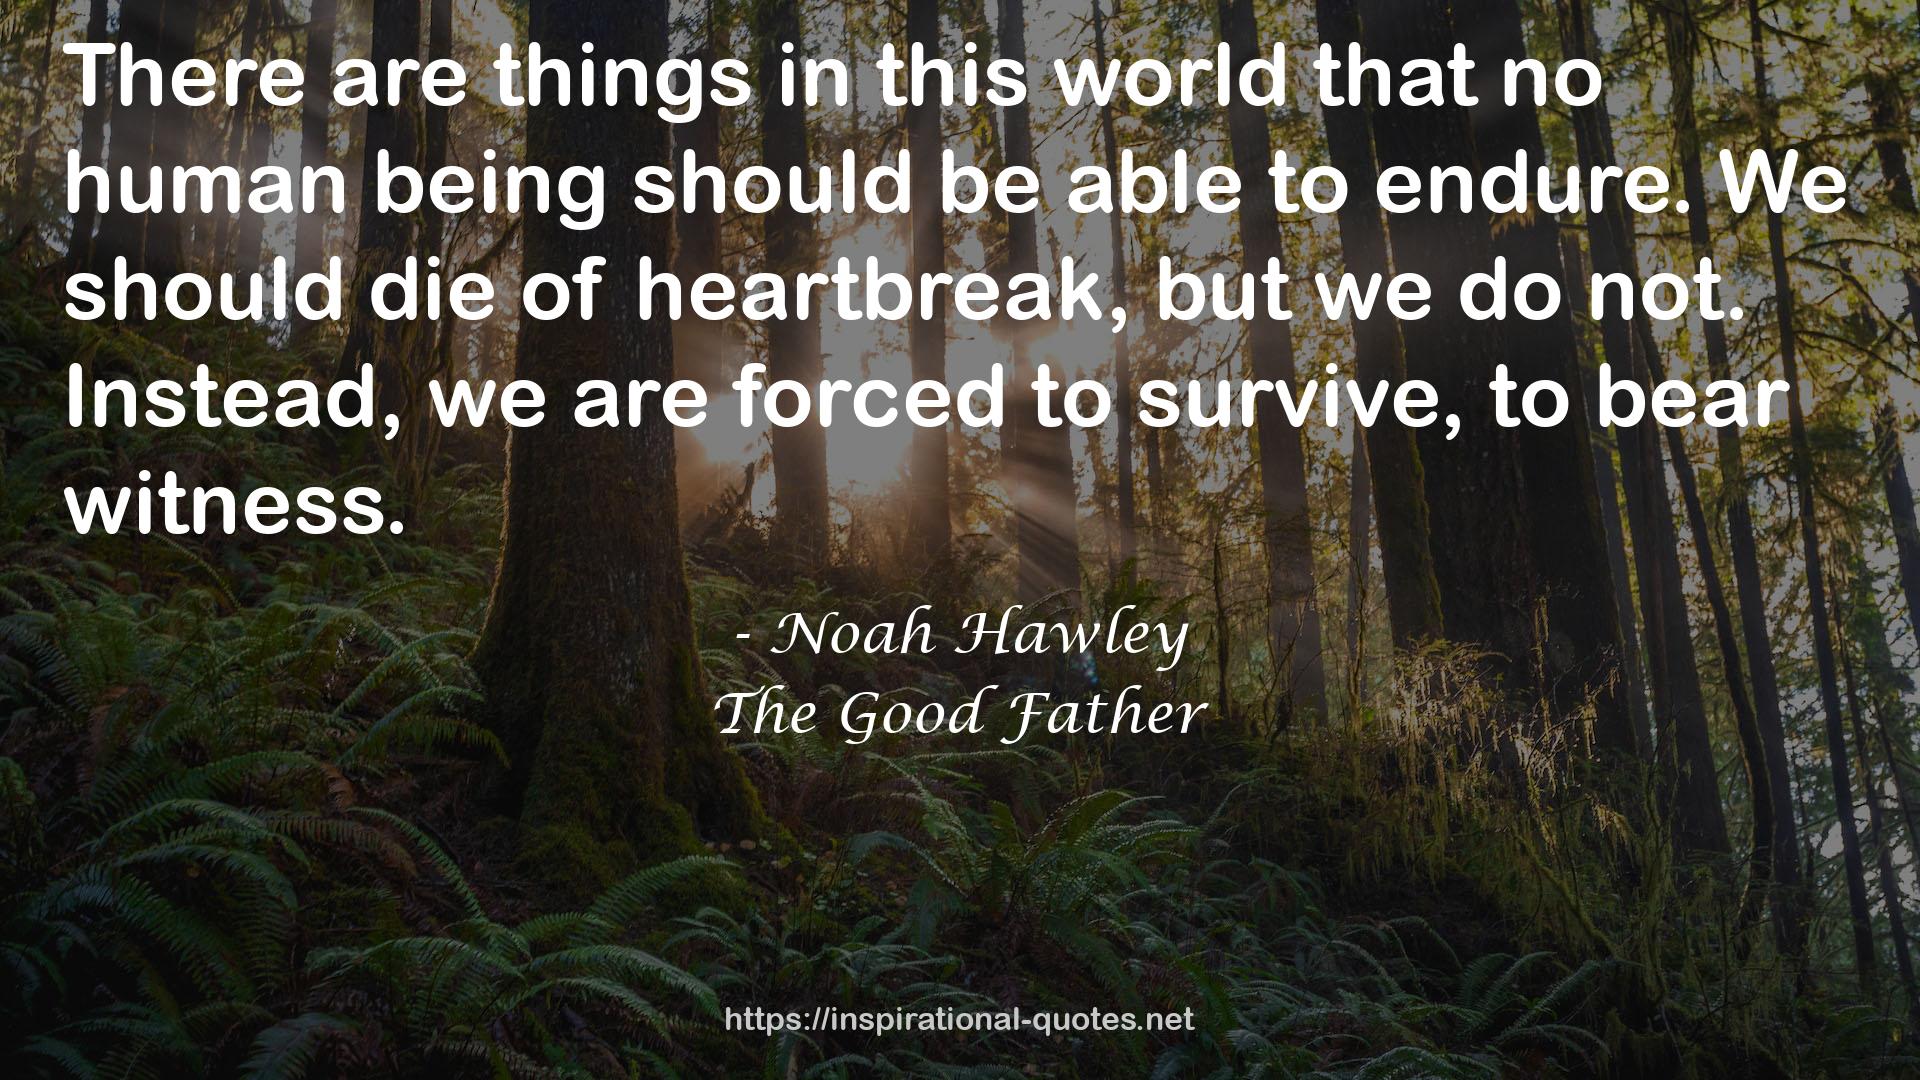 The Good Father QUOTES